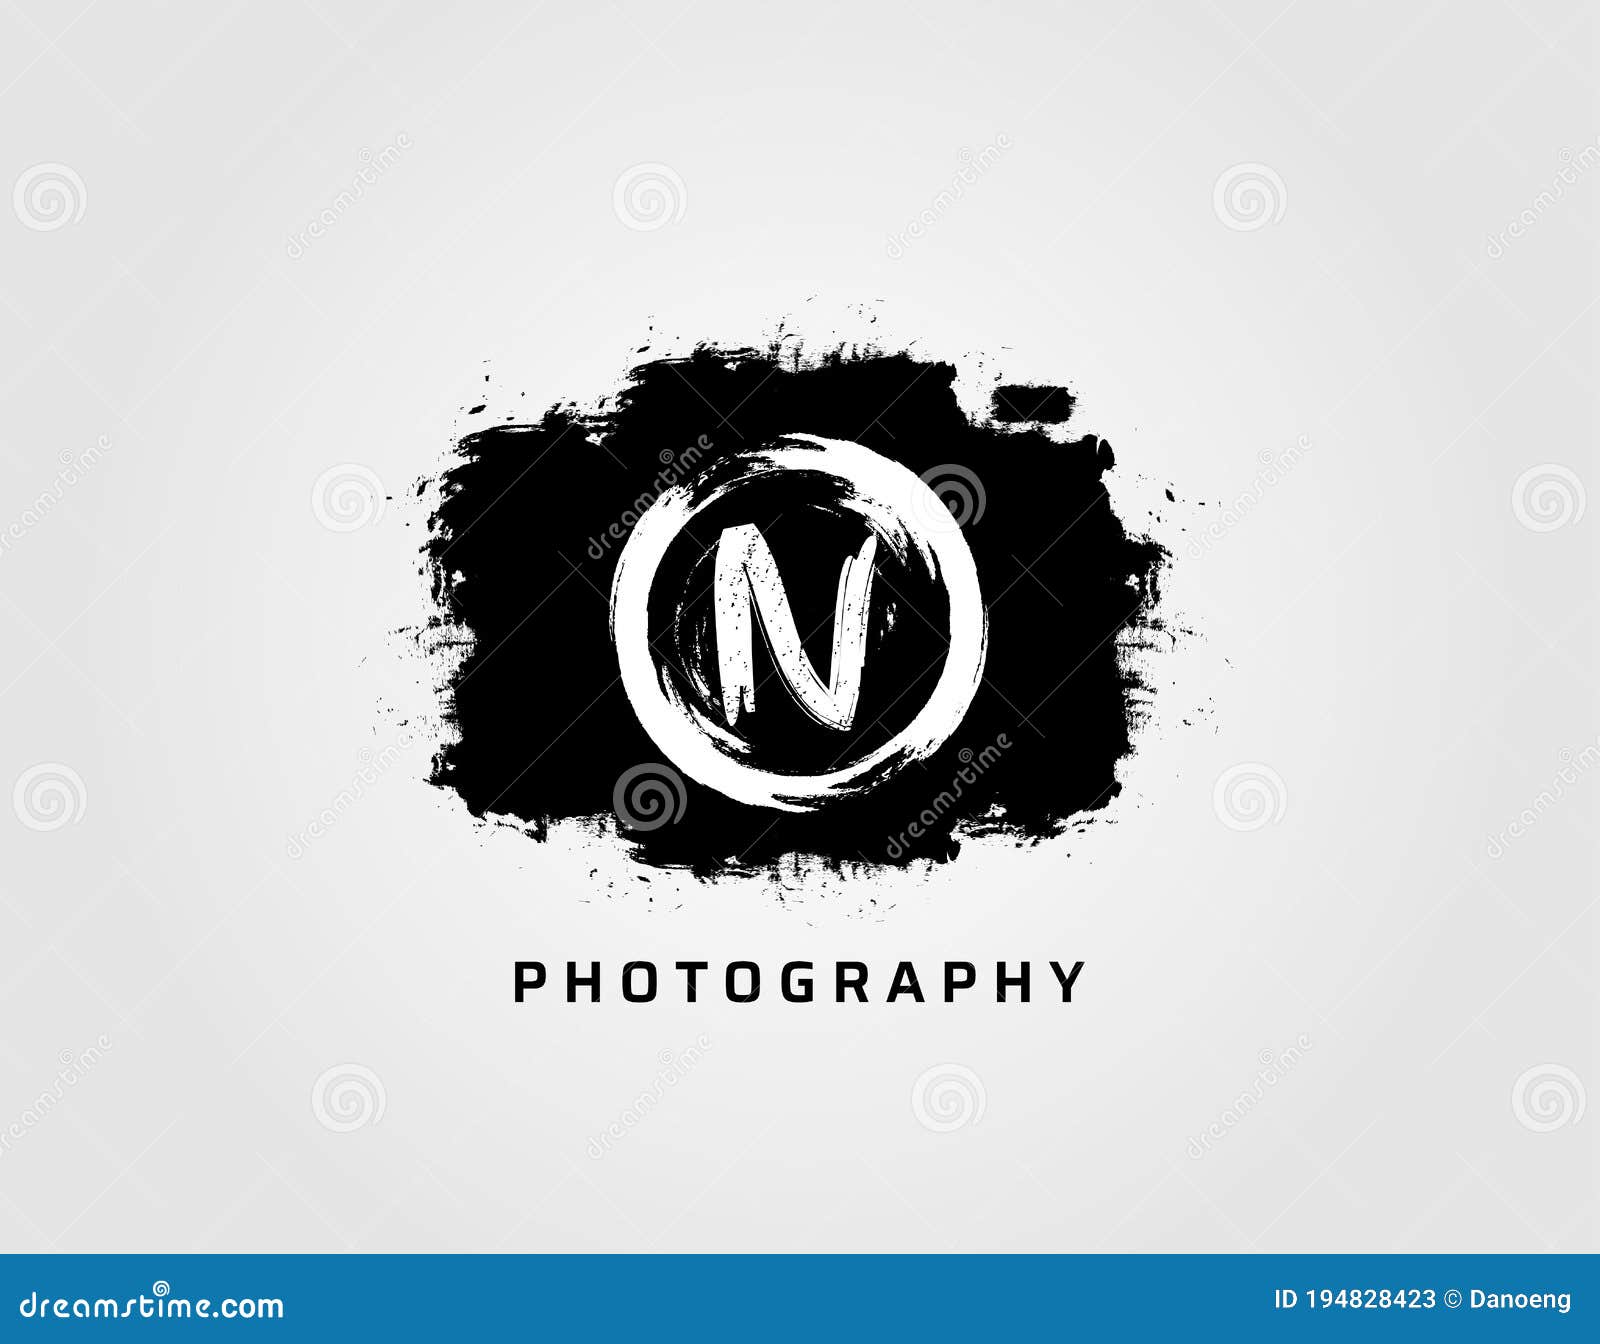 Photography Letter N Logo Design Concept Template. Rusty Vintage ...